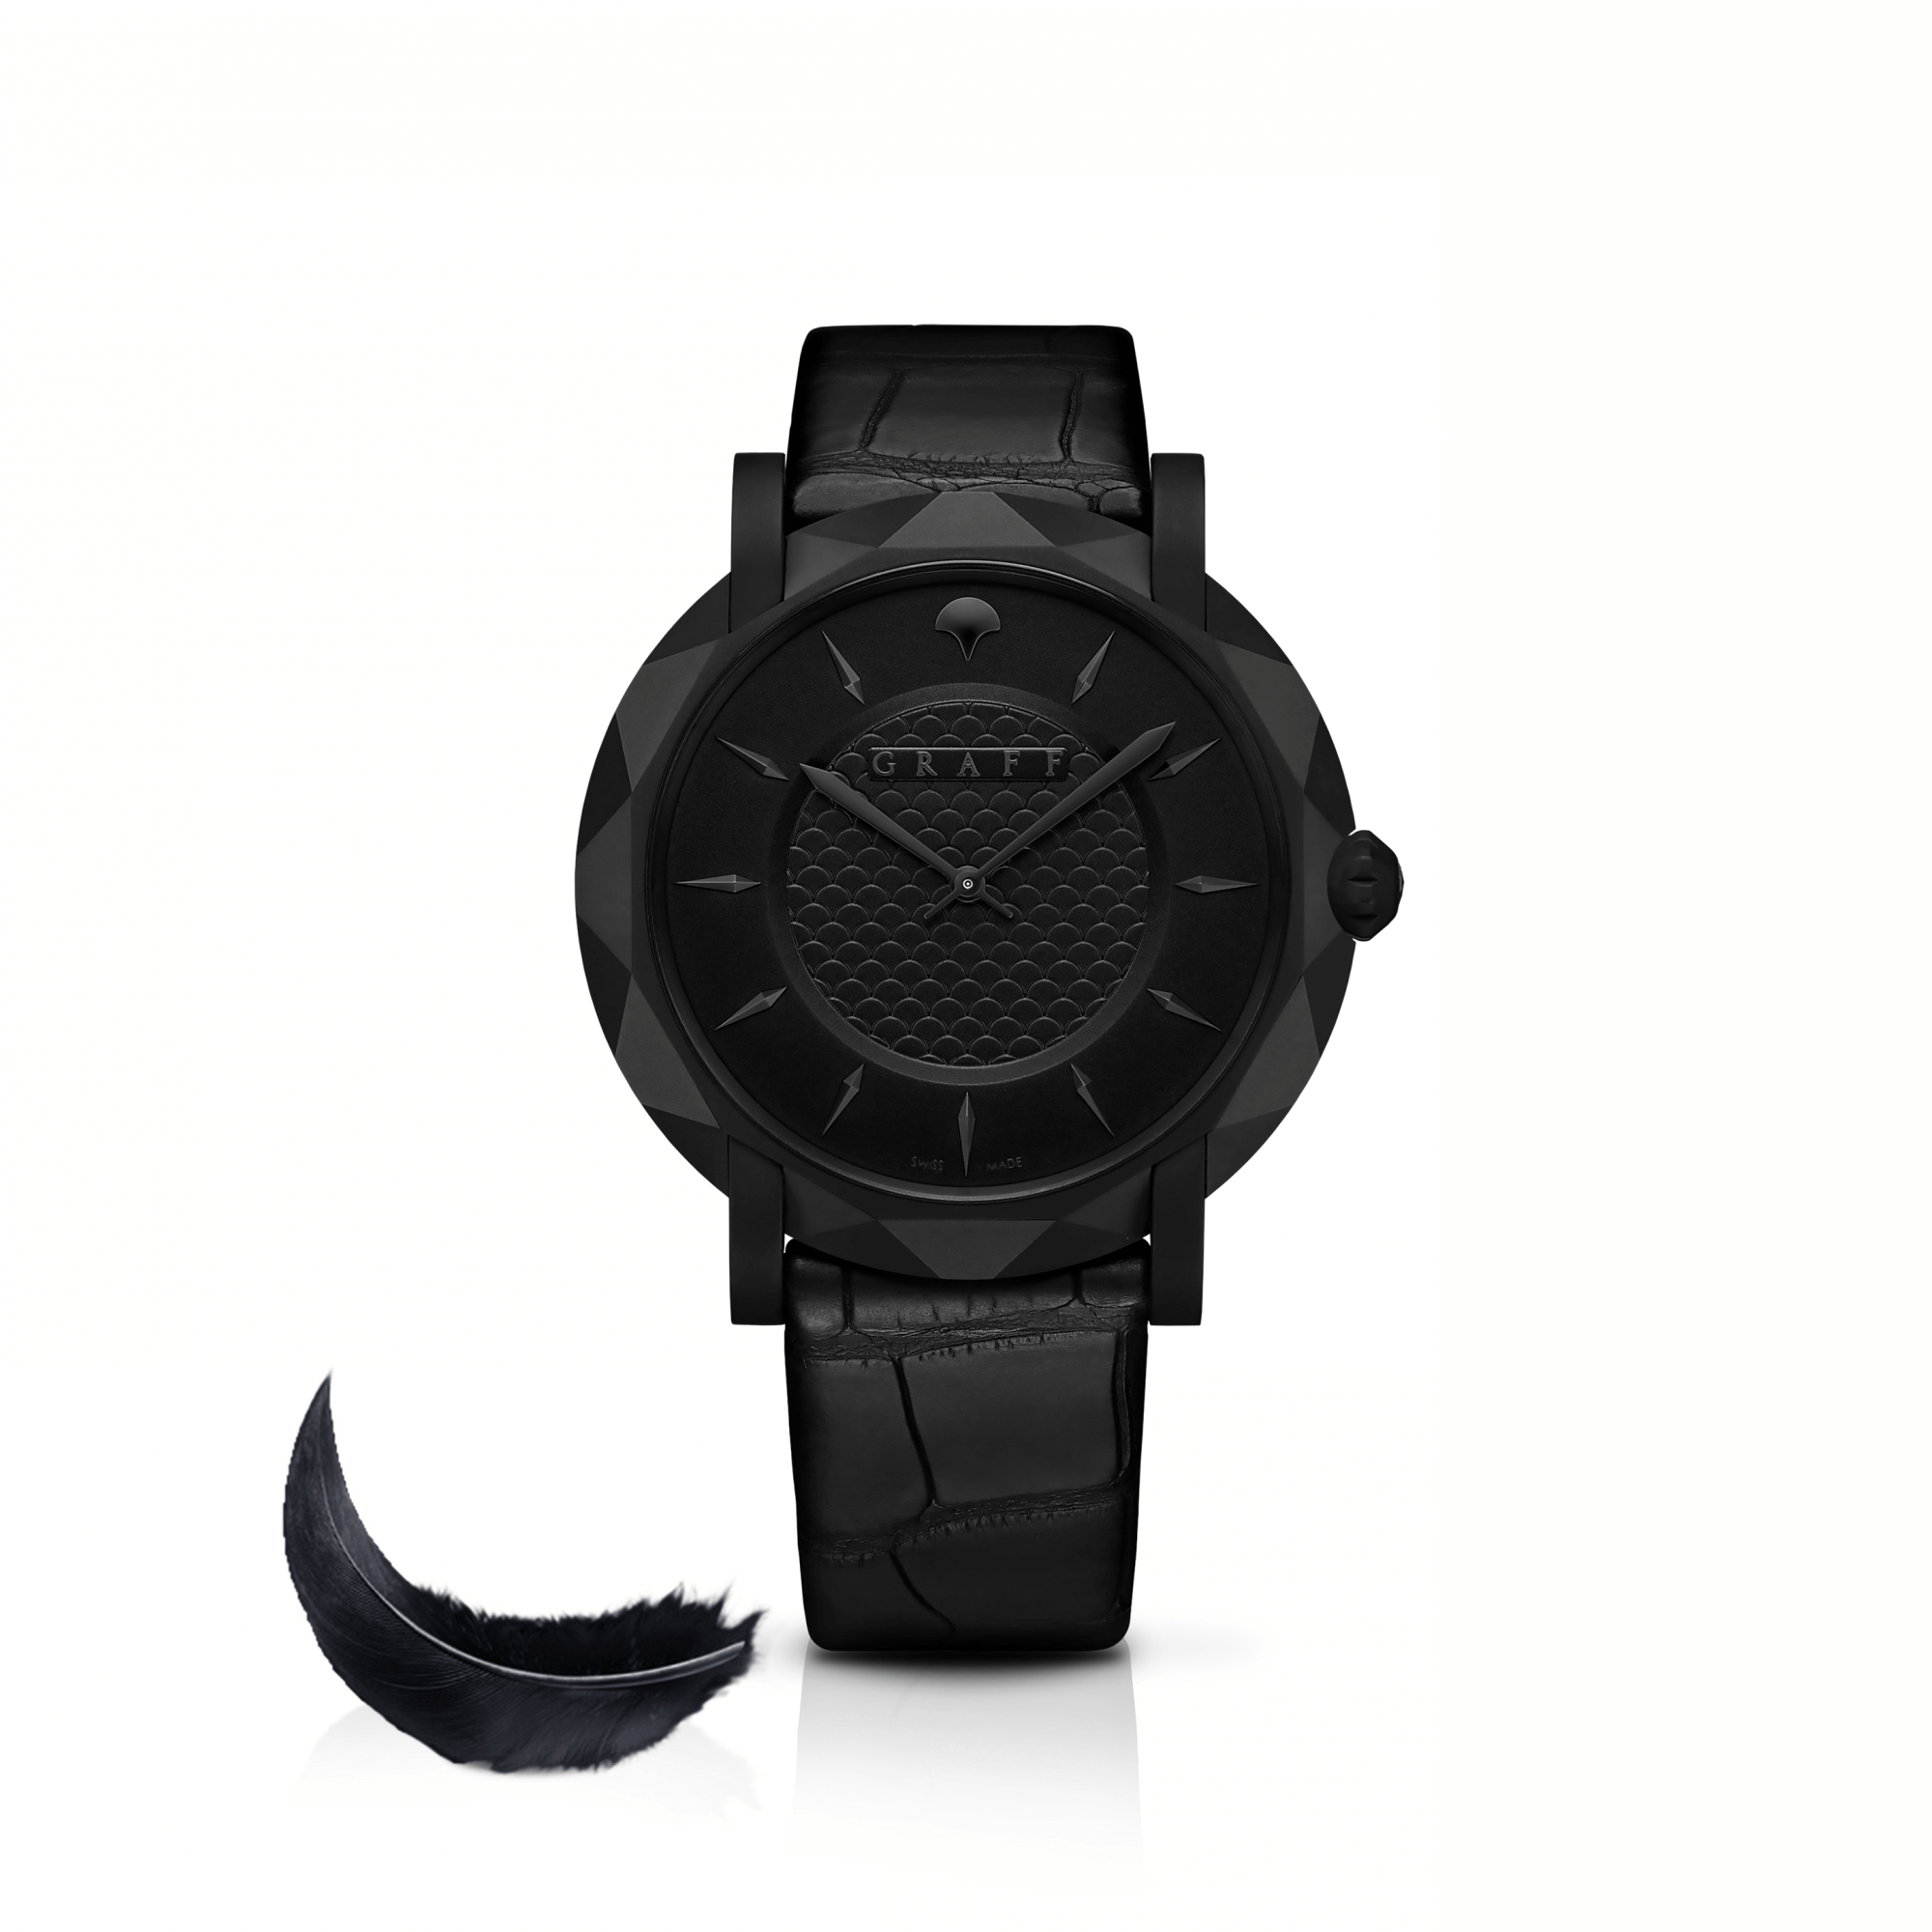 Graff Slim Eclipse 43mm Watch BLACK DIAL, TITANIUM DLC with a black feather on the side